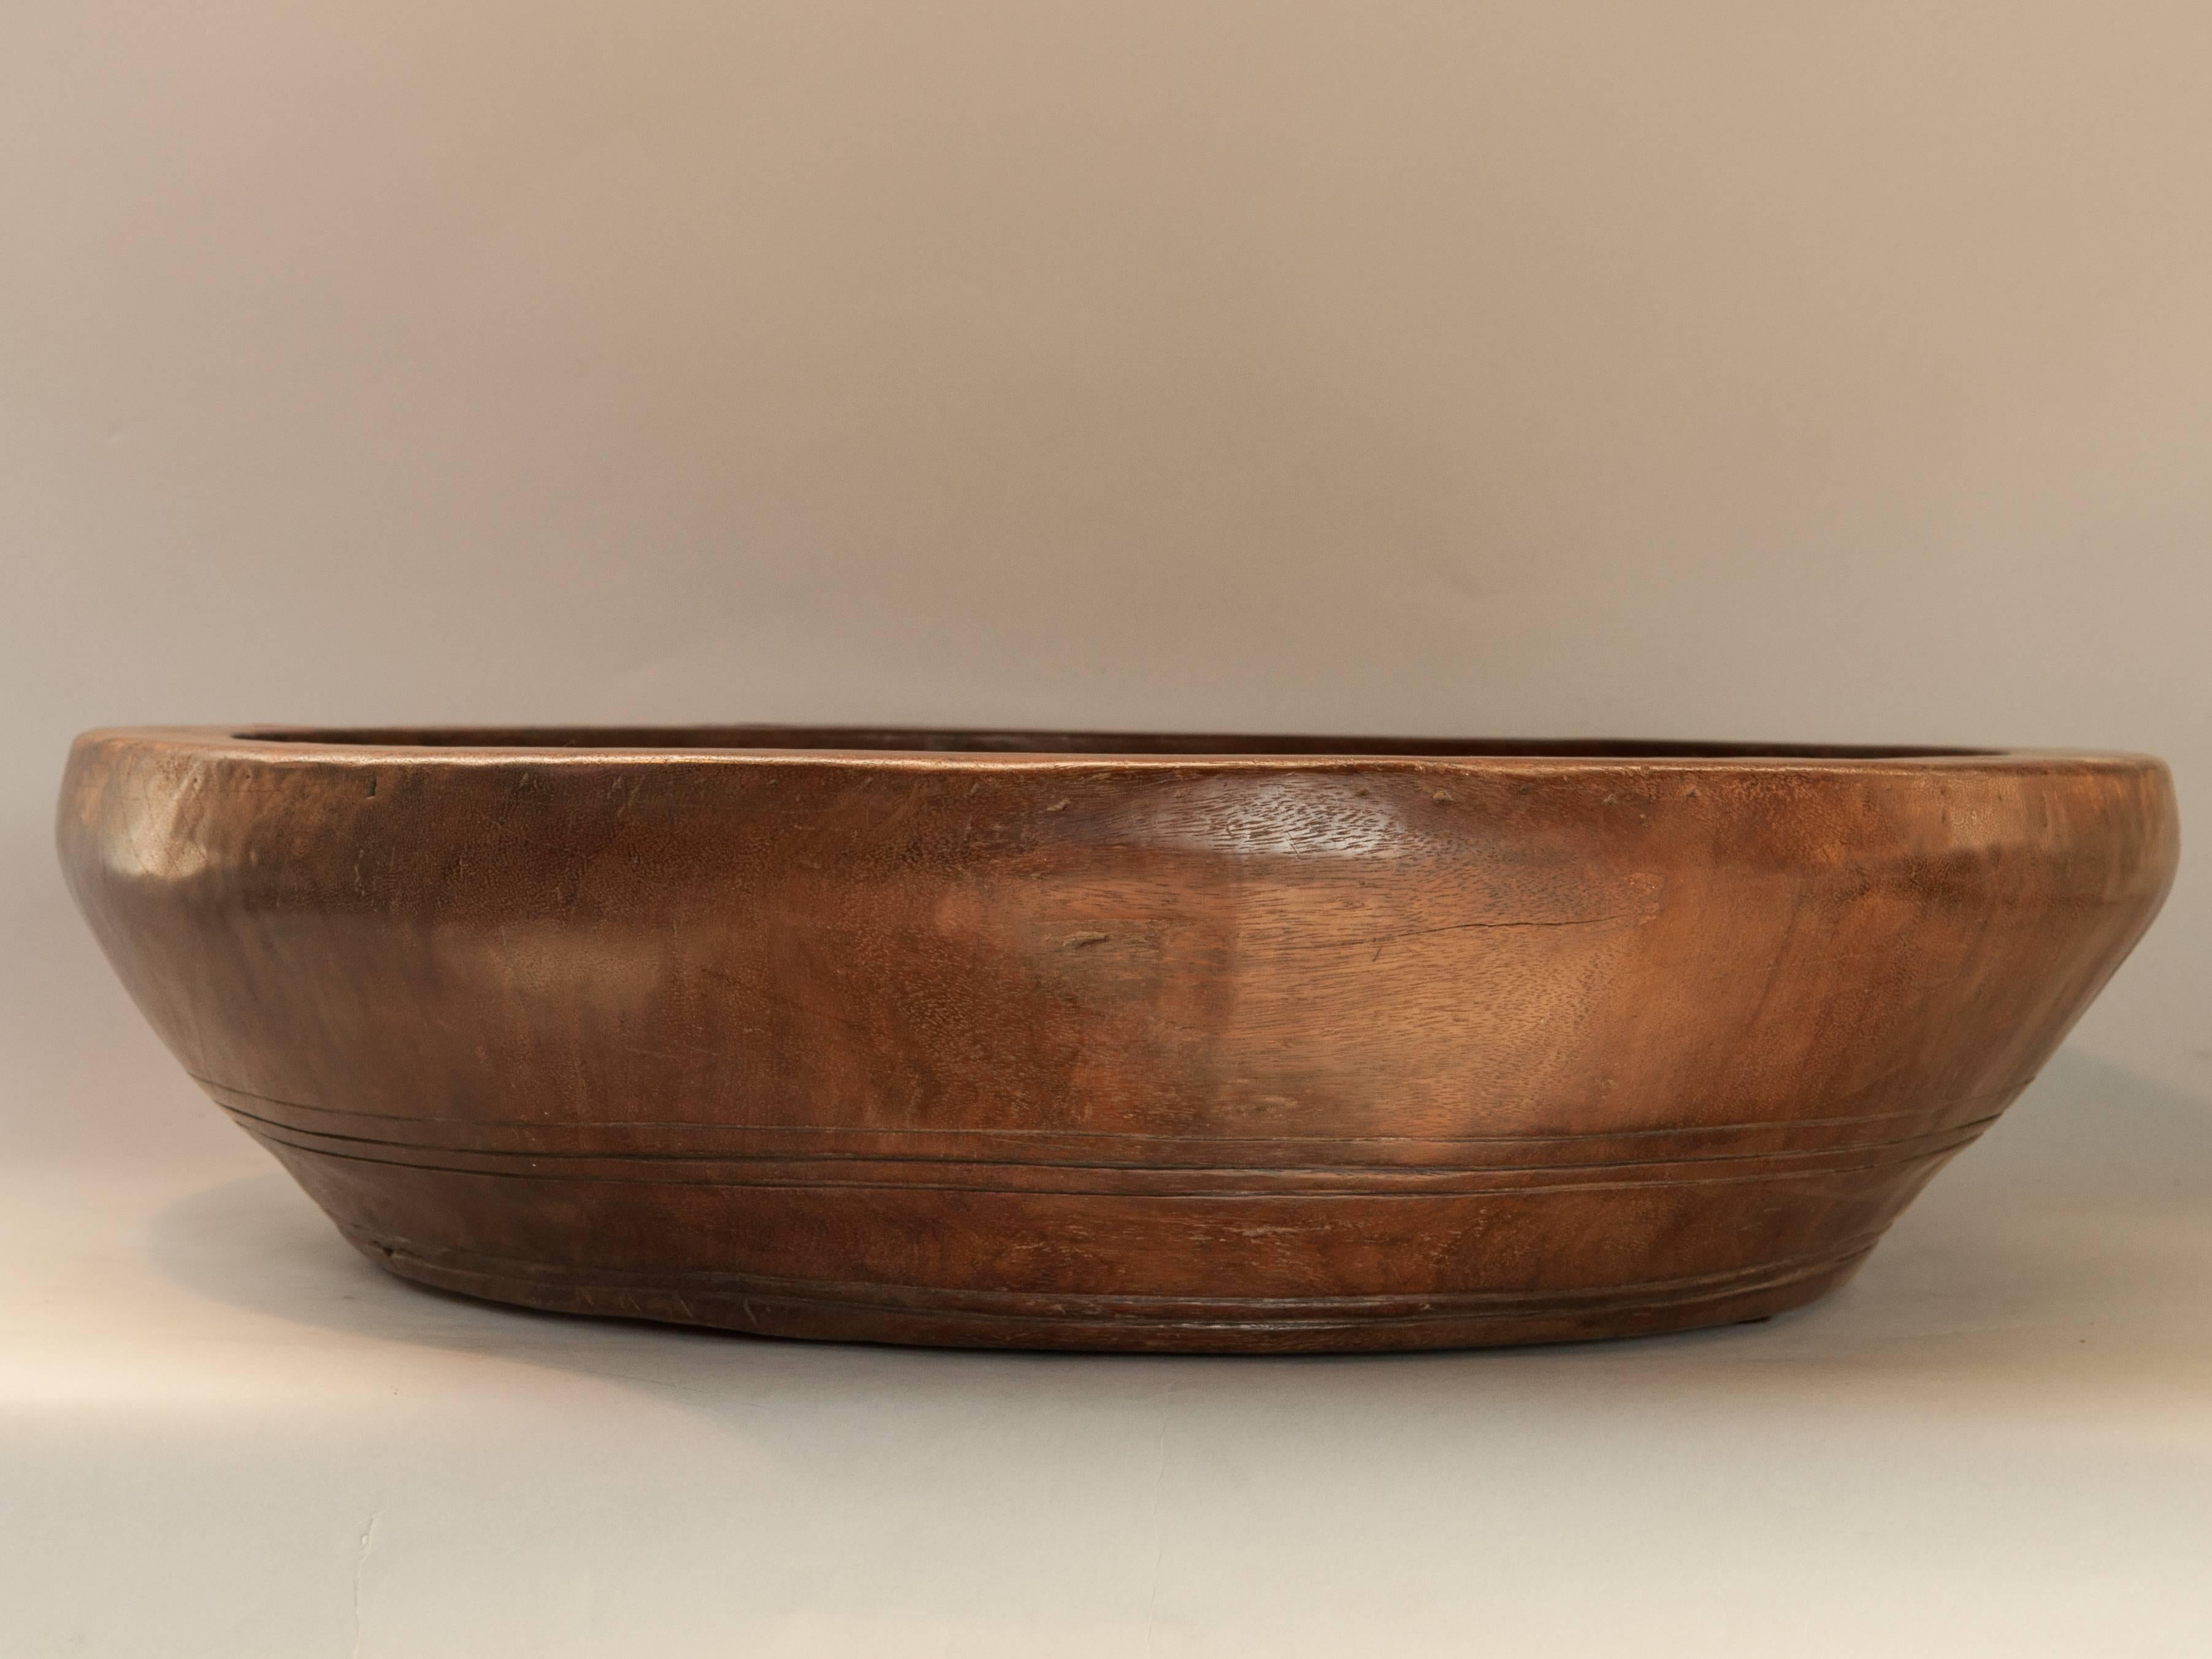 Large merbau wood rebana drum bowl. Lampung, Sumatra early-mid 20th century.
This exceptionally large bowl is made from an old wooden drum from the area of Lampung in southern Sumatra. The outer frame is fashioned from a single piece of Merbau wood;